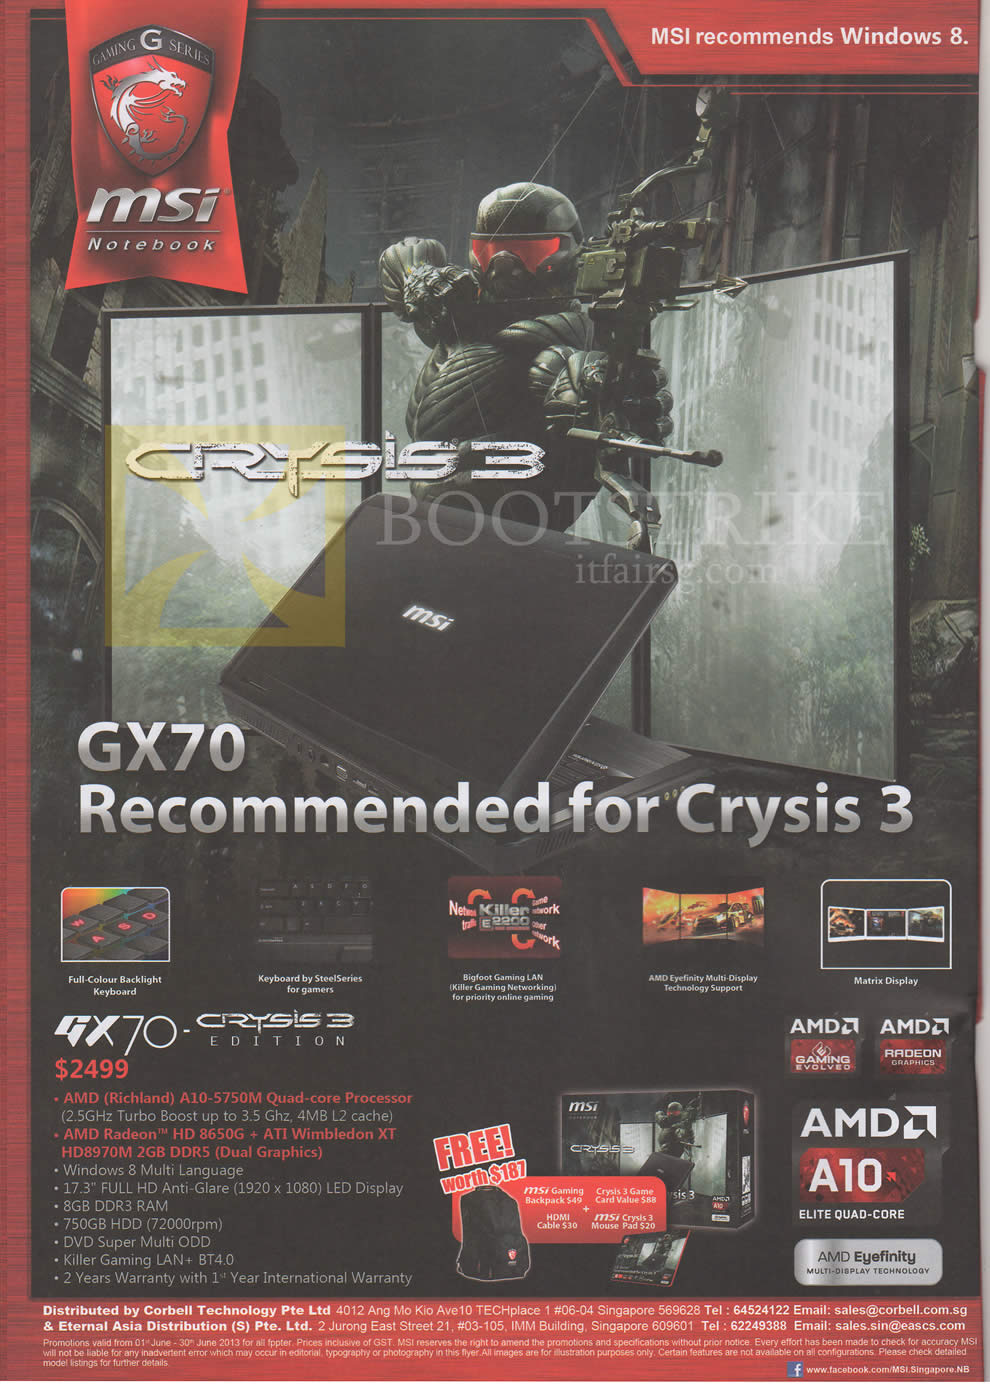 PC SHOW 2013 price list image brochure of MSI Notebooks GX70 Crysis 3 Edition